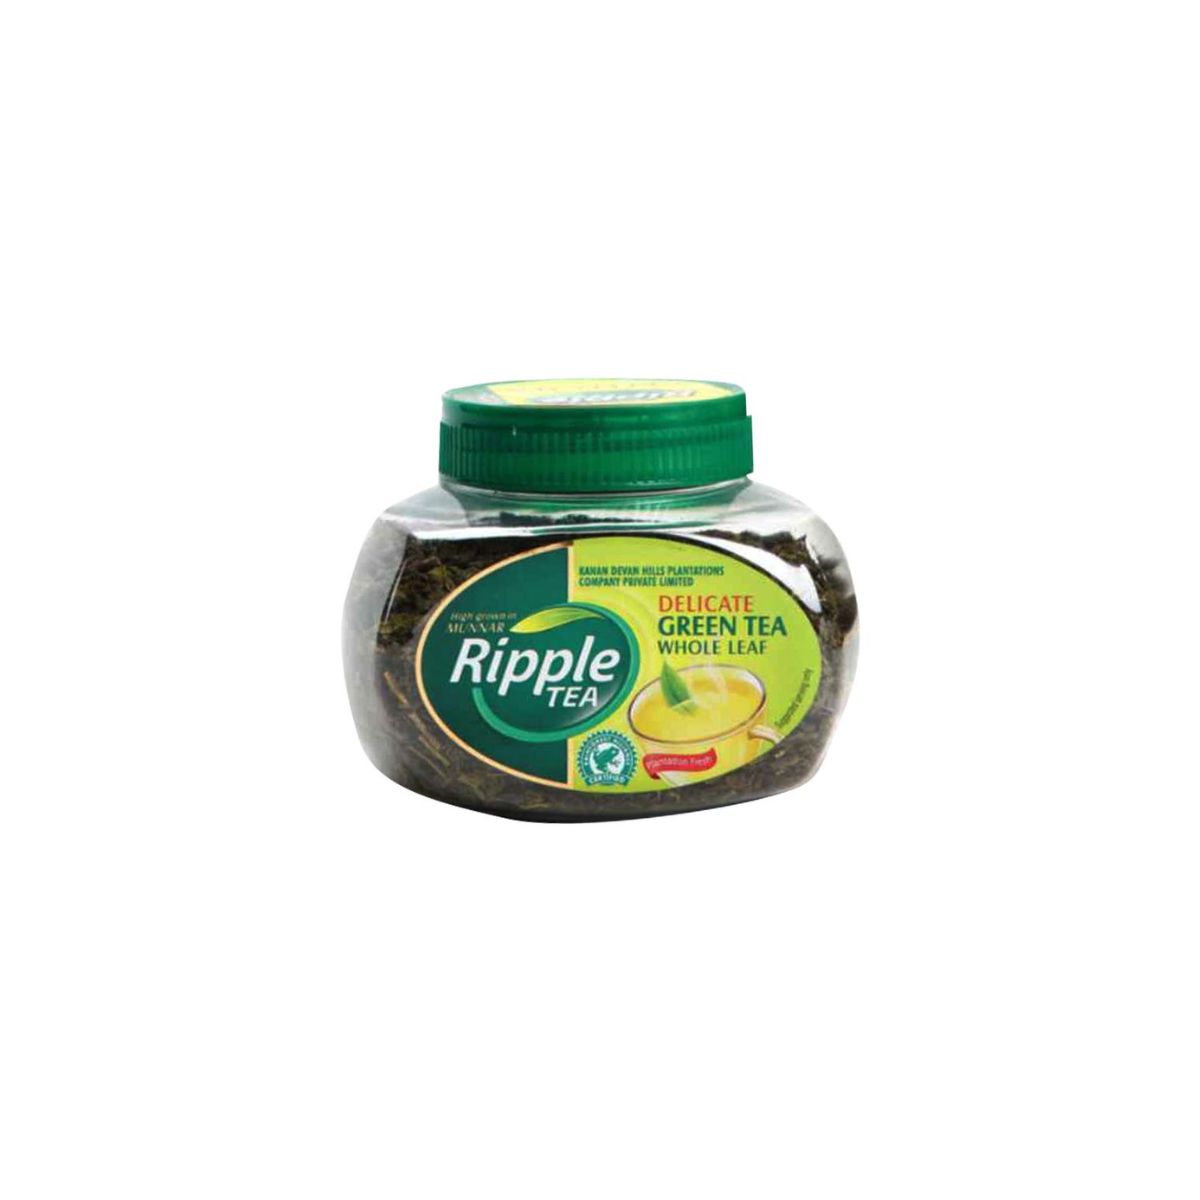 Ripple Delicate Green Tea Whole Leaf gm - cryptolove.funH NADAR AND CO